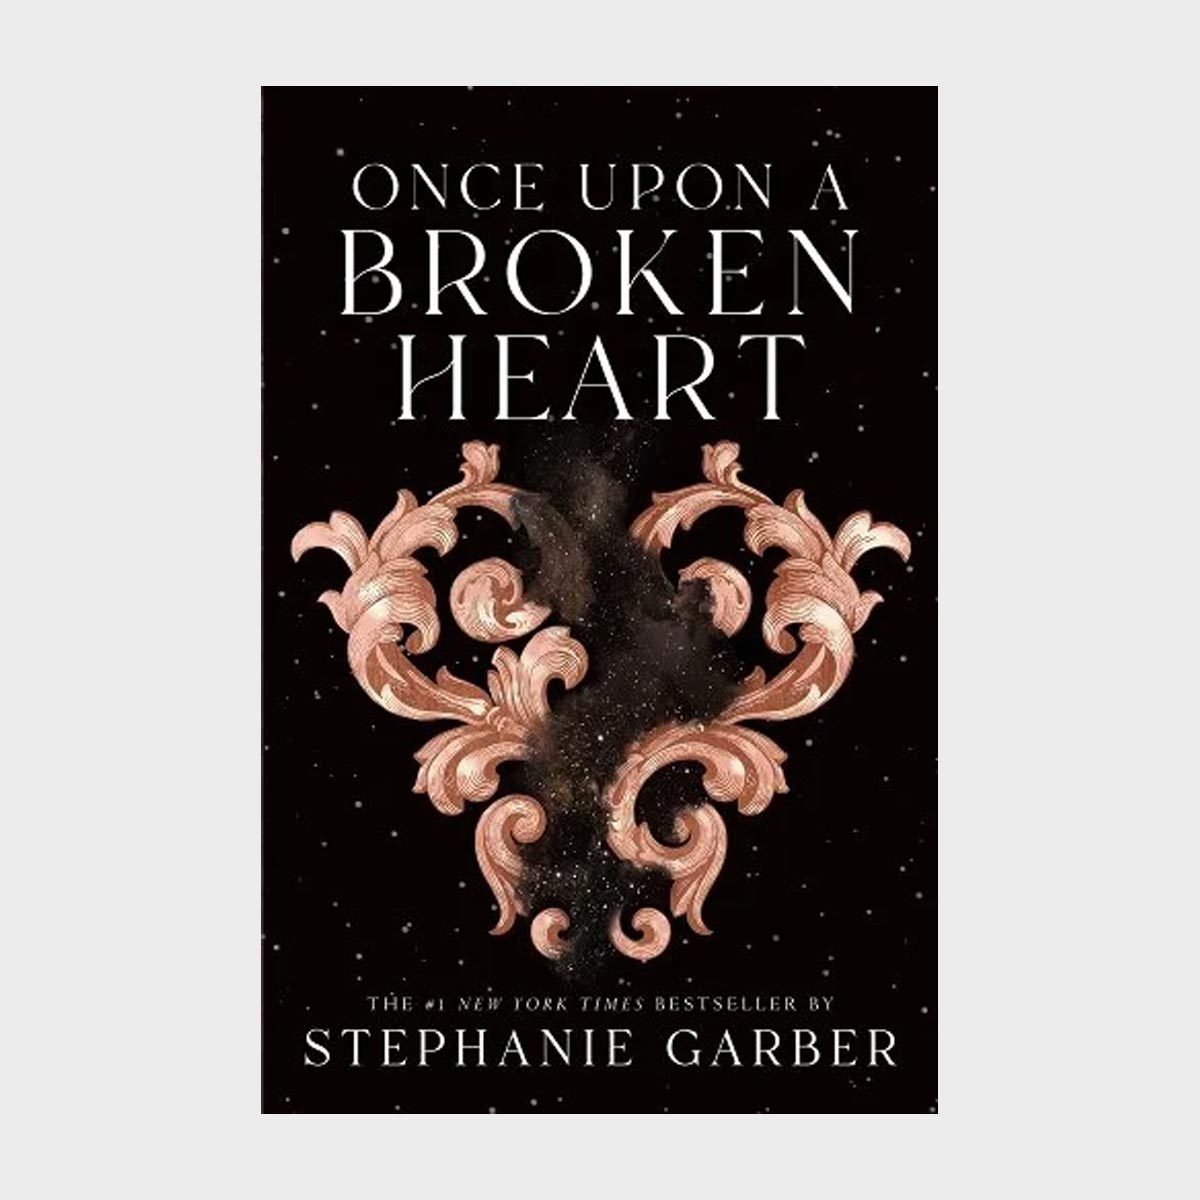 <p class=""><strong>Series starter: </strong><a href="https://bookshop.org/p/books/once-upon-a-broken-heart-stephanie-garber/17309886" rel="noopener noreferrer"><em>Once Upon a Broken Heart</em></a></p> <p class=""><strong>What you're in for: </strong>Fairy-tale twists and turns and a wicked heartthrob love interest</p> <p>For those craving a <a href="https://www.rd.com/list/fantasy-romance-books/" rel="noopener noreferrer">romance with fantasy elements</a>, Stephanie Garber's latest young adult series is a must-read. It follows the lovely Evangeline Fox, who makes a twisted deal with the devilish Jacks, the Prince of Hearts, and ends up with more than she bargained for in the form of cursed magic. Now that Evangeline is in Jacks's debt, she's forced into following his plans, which could either lead her toward a happily ever after or unfortunate tragedy. The first book was released in 2021, with the final installment hitting shelves last fall—good news for readers who love bingeing book series.</p> <p class="listicle-page__cta-button-shop"><a class="shop-btn" href="https://bookshop.org/p/books/once-upon-a-broken-heart-stephanie-garber/17309886">Shop Now</a></p>